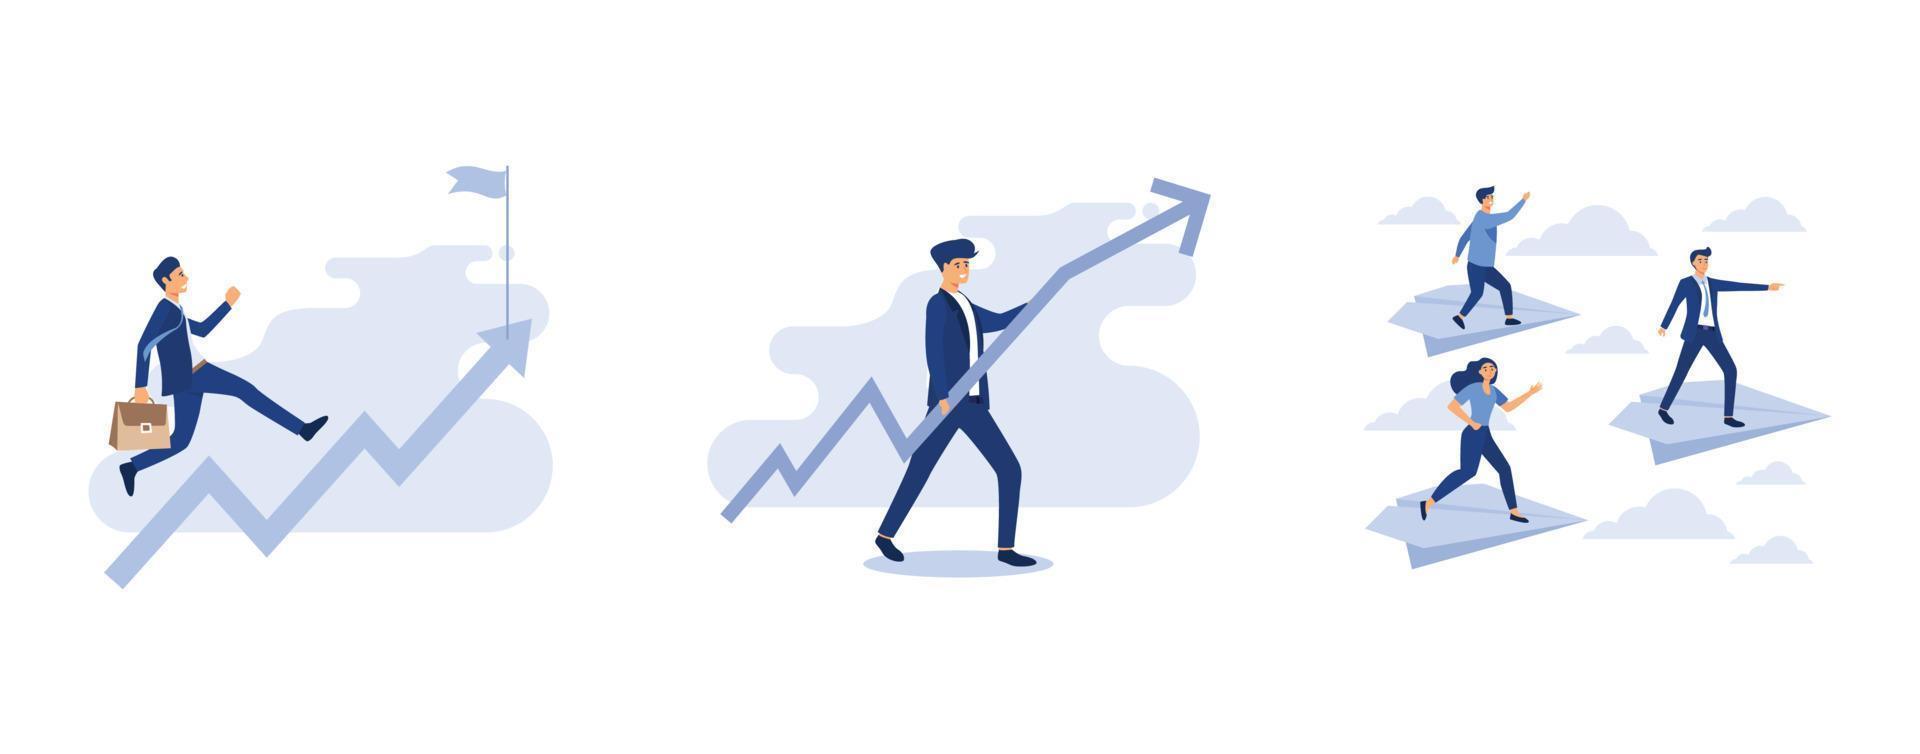 people fly up towards the target, businessman runs with increasing graph arrow, businessman balancing on the paper planes searching for business opportunity, set flat vector modern illustration